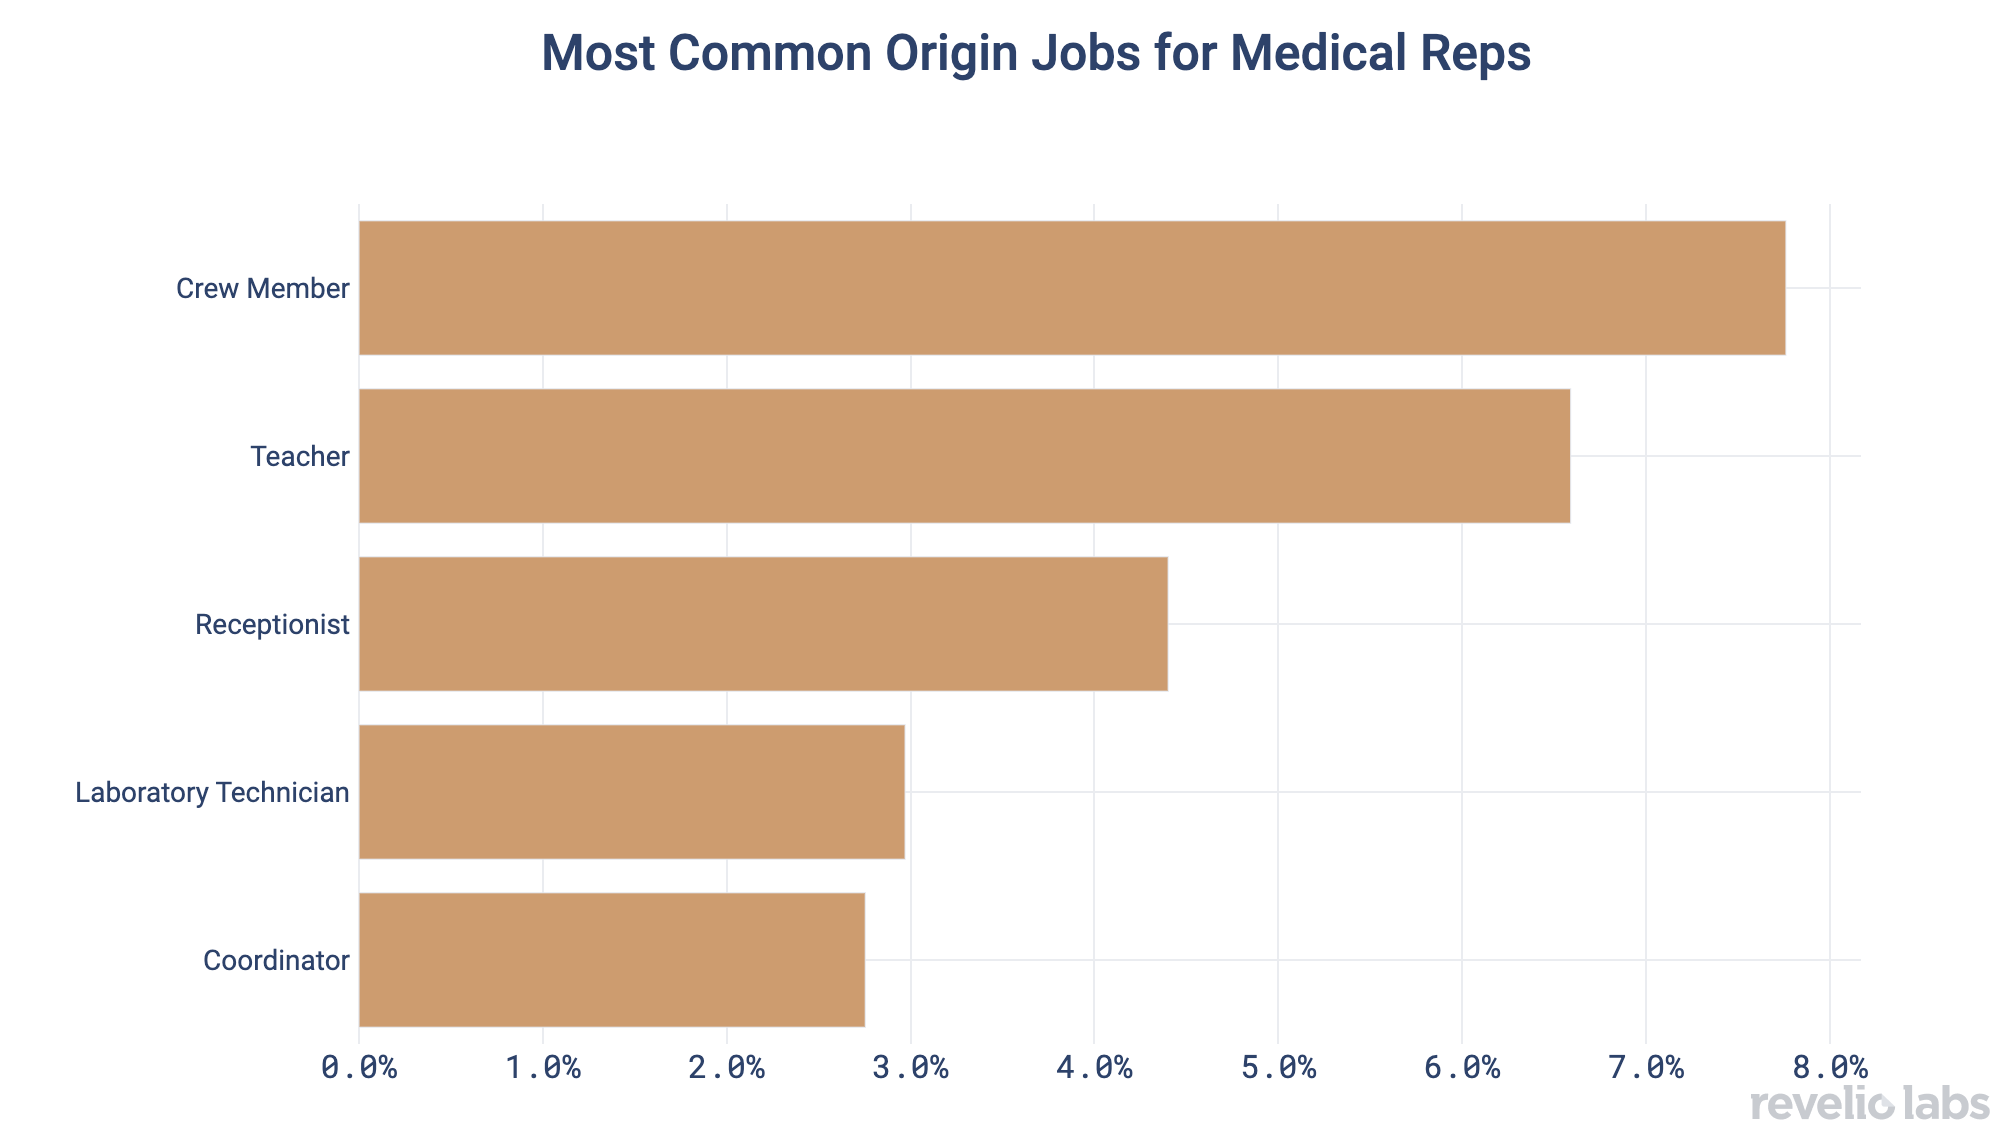 Most Common Origin Jobs for Medical Reps